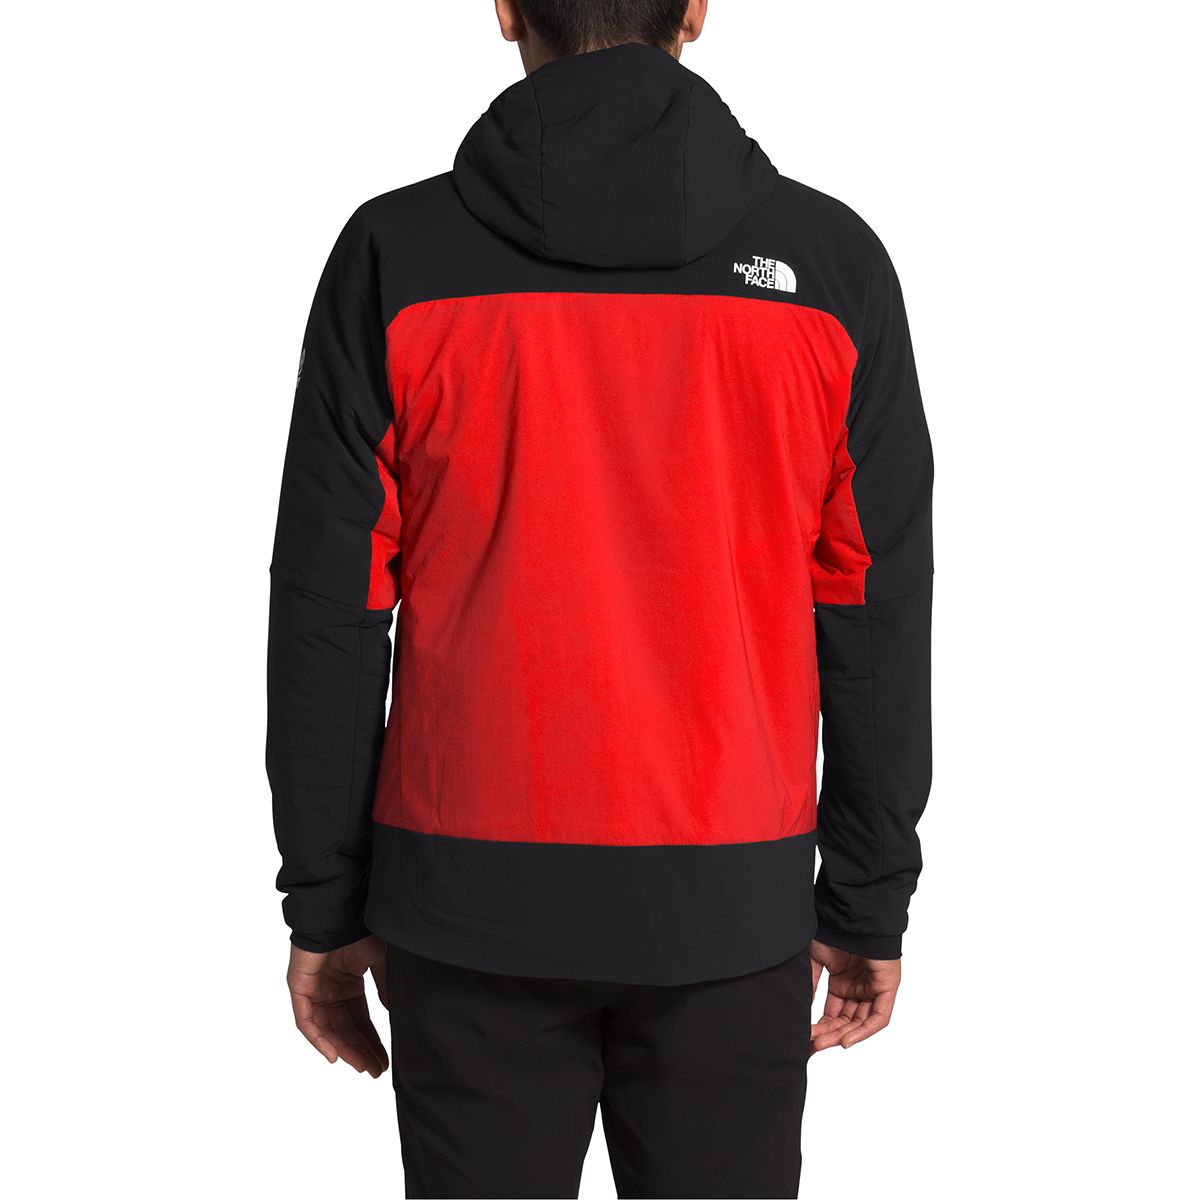 Review: The North Face Summit L3 Ventrix Hoodie - The Big Outside